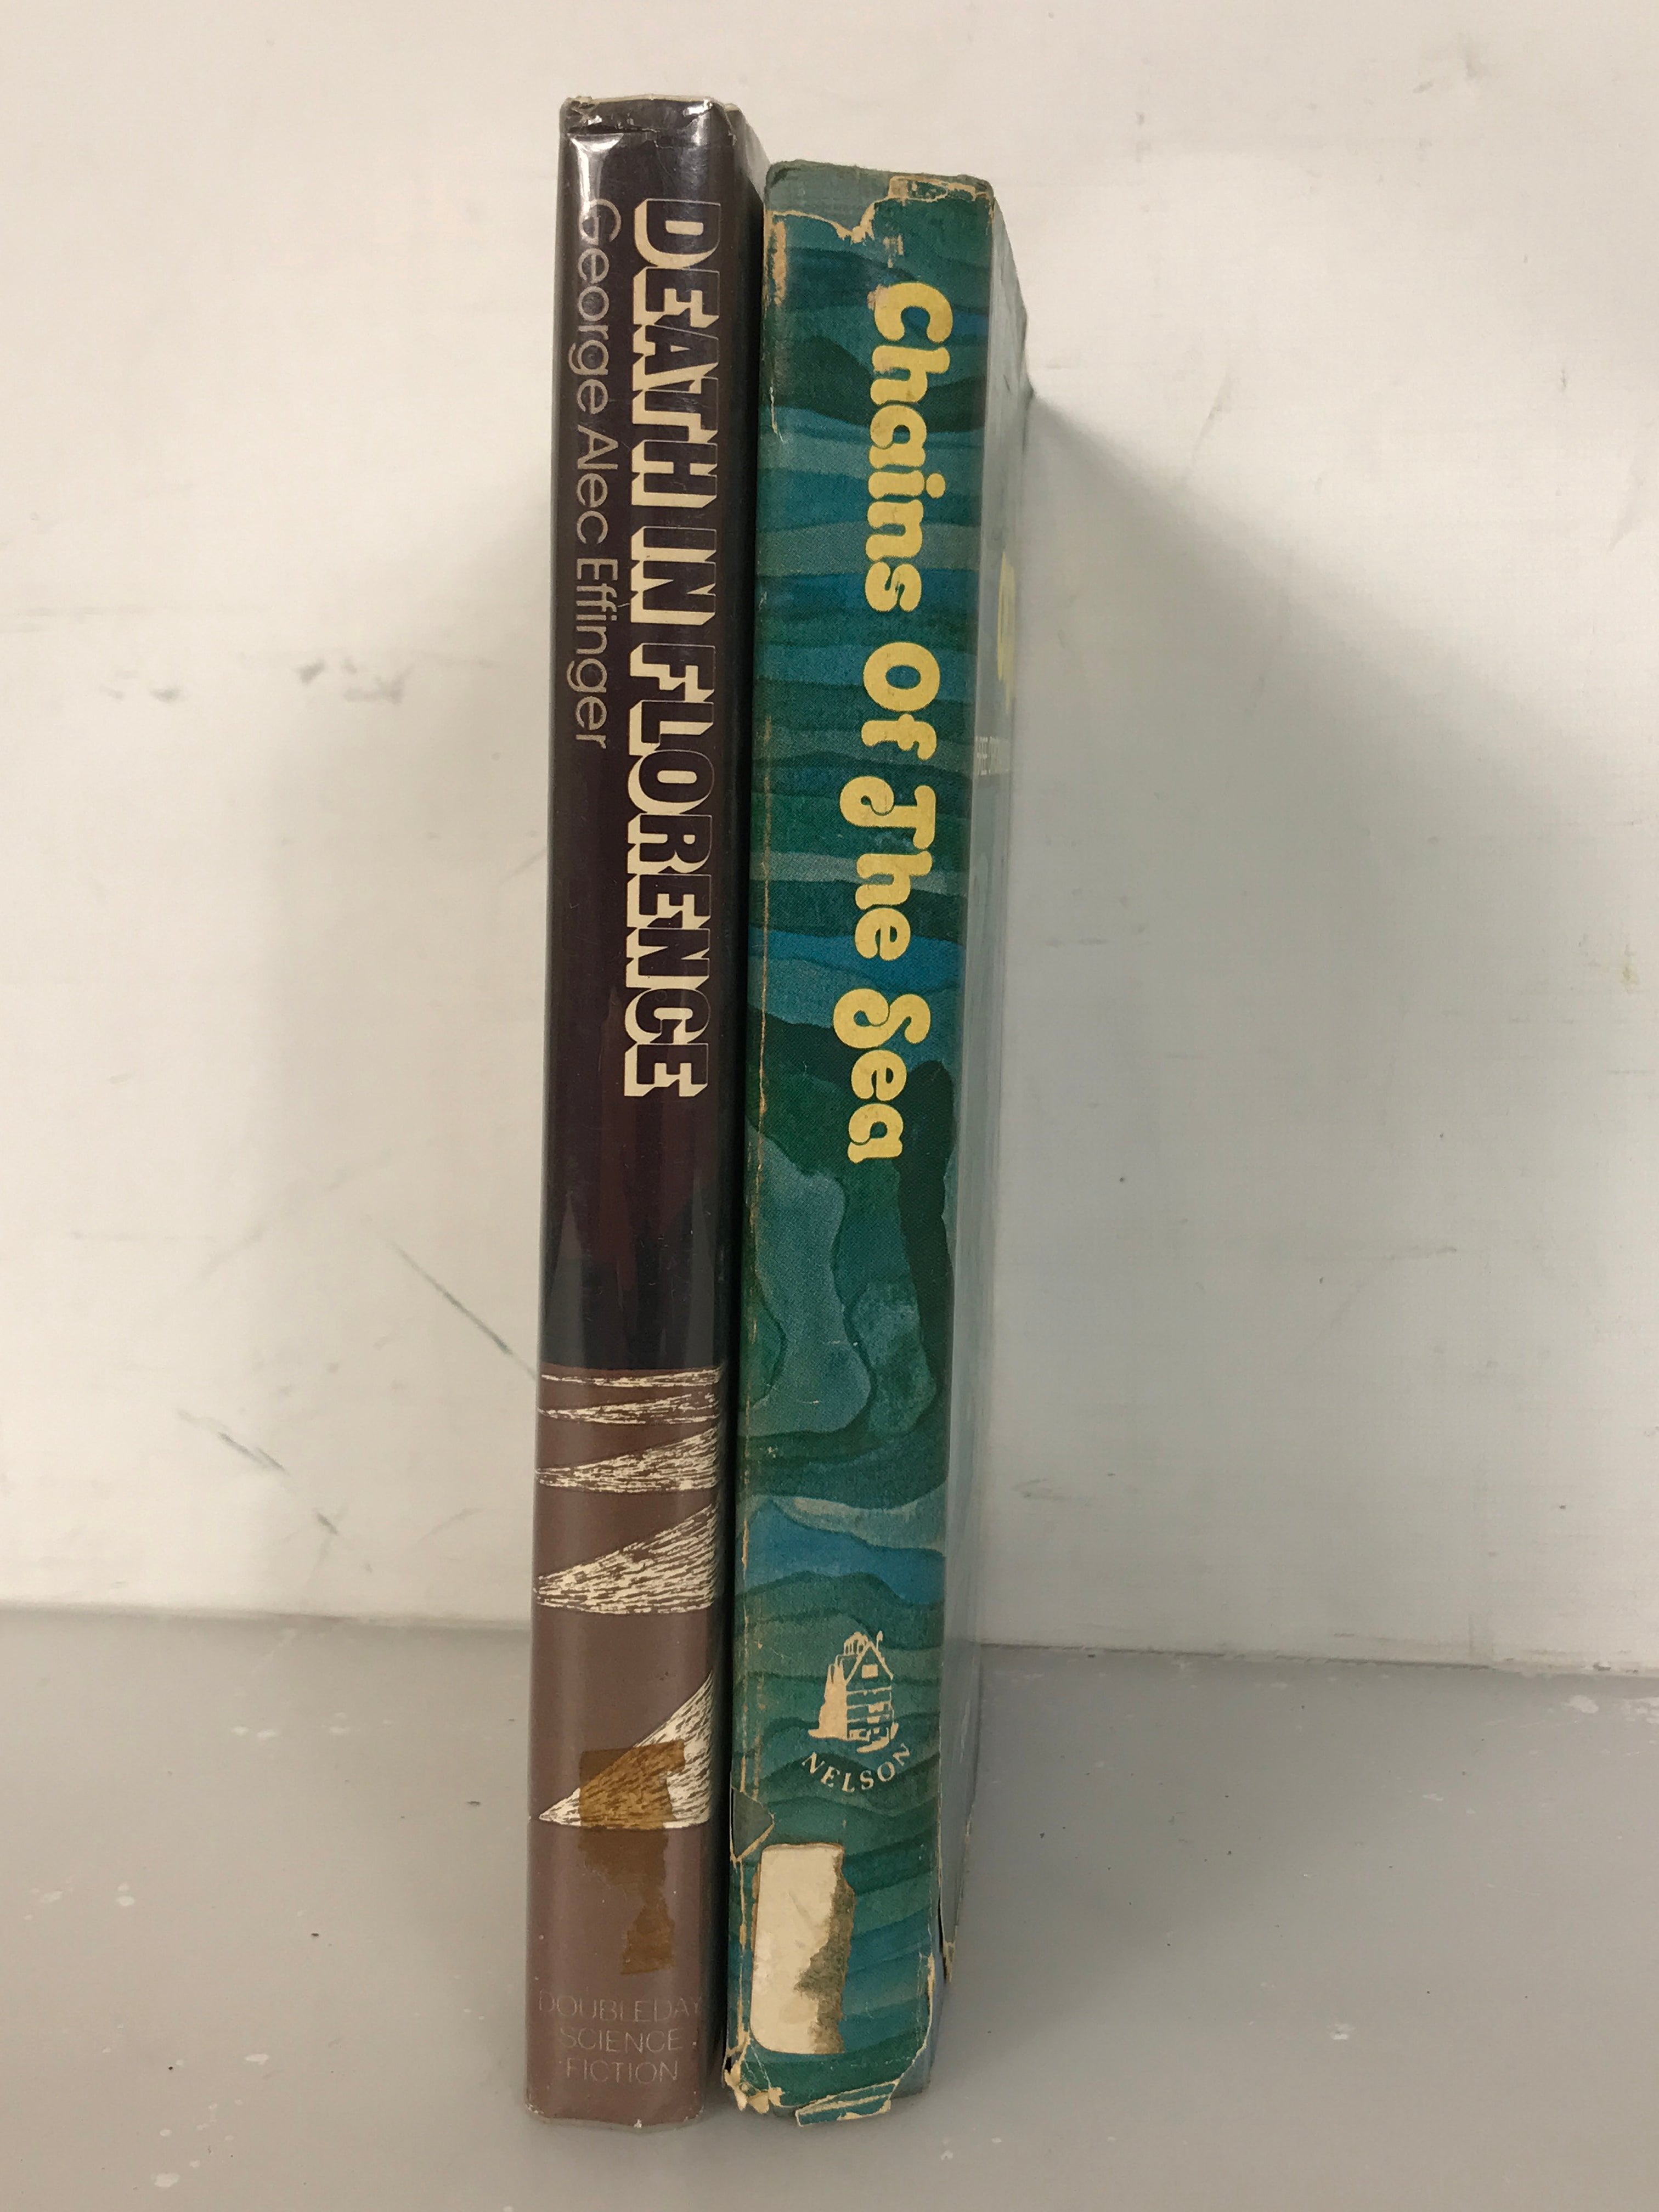 Lot of 2 Vintage First Edition Effinger Books: Death in Florence (1978) and Chains of the Sea (1973) HC DJ